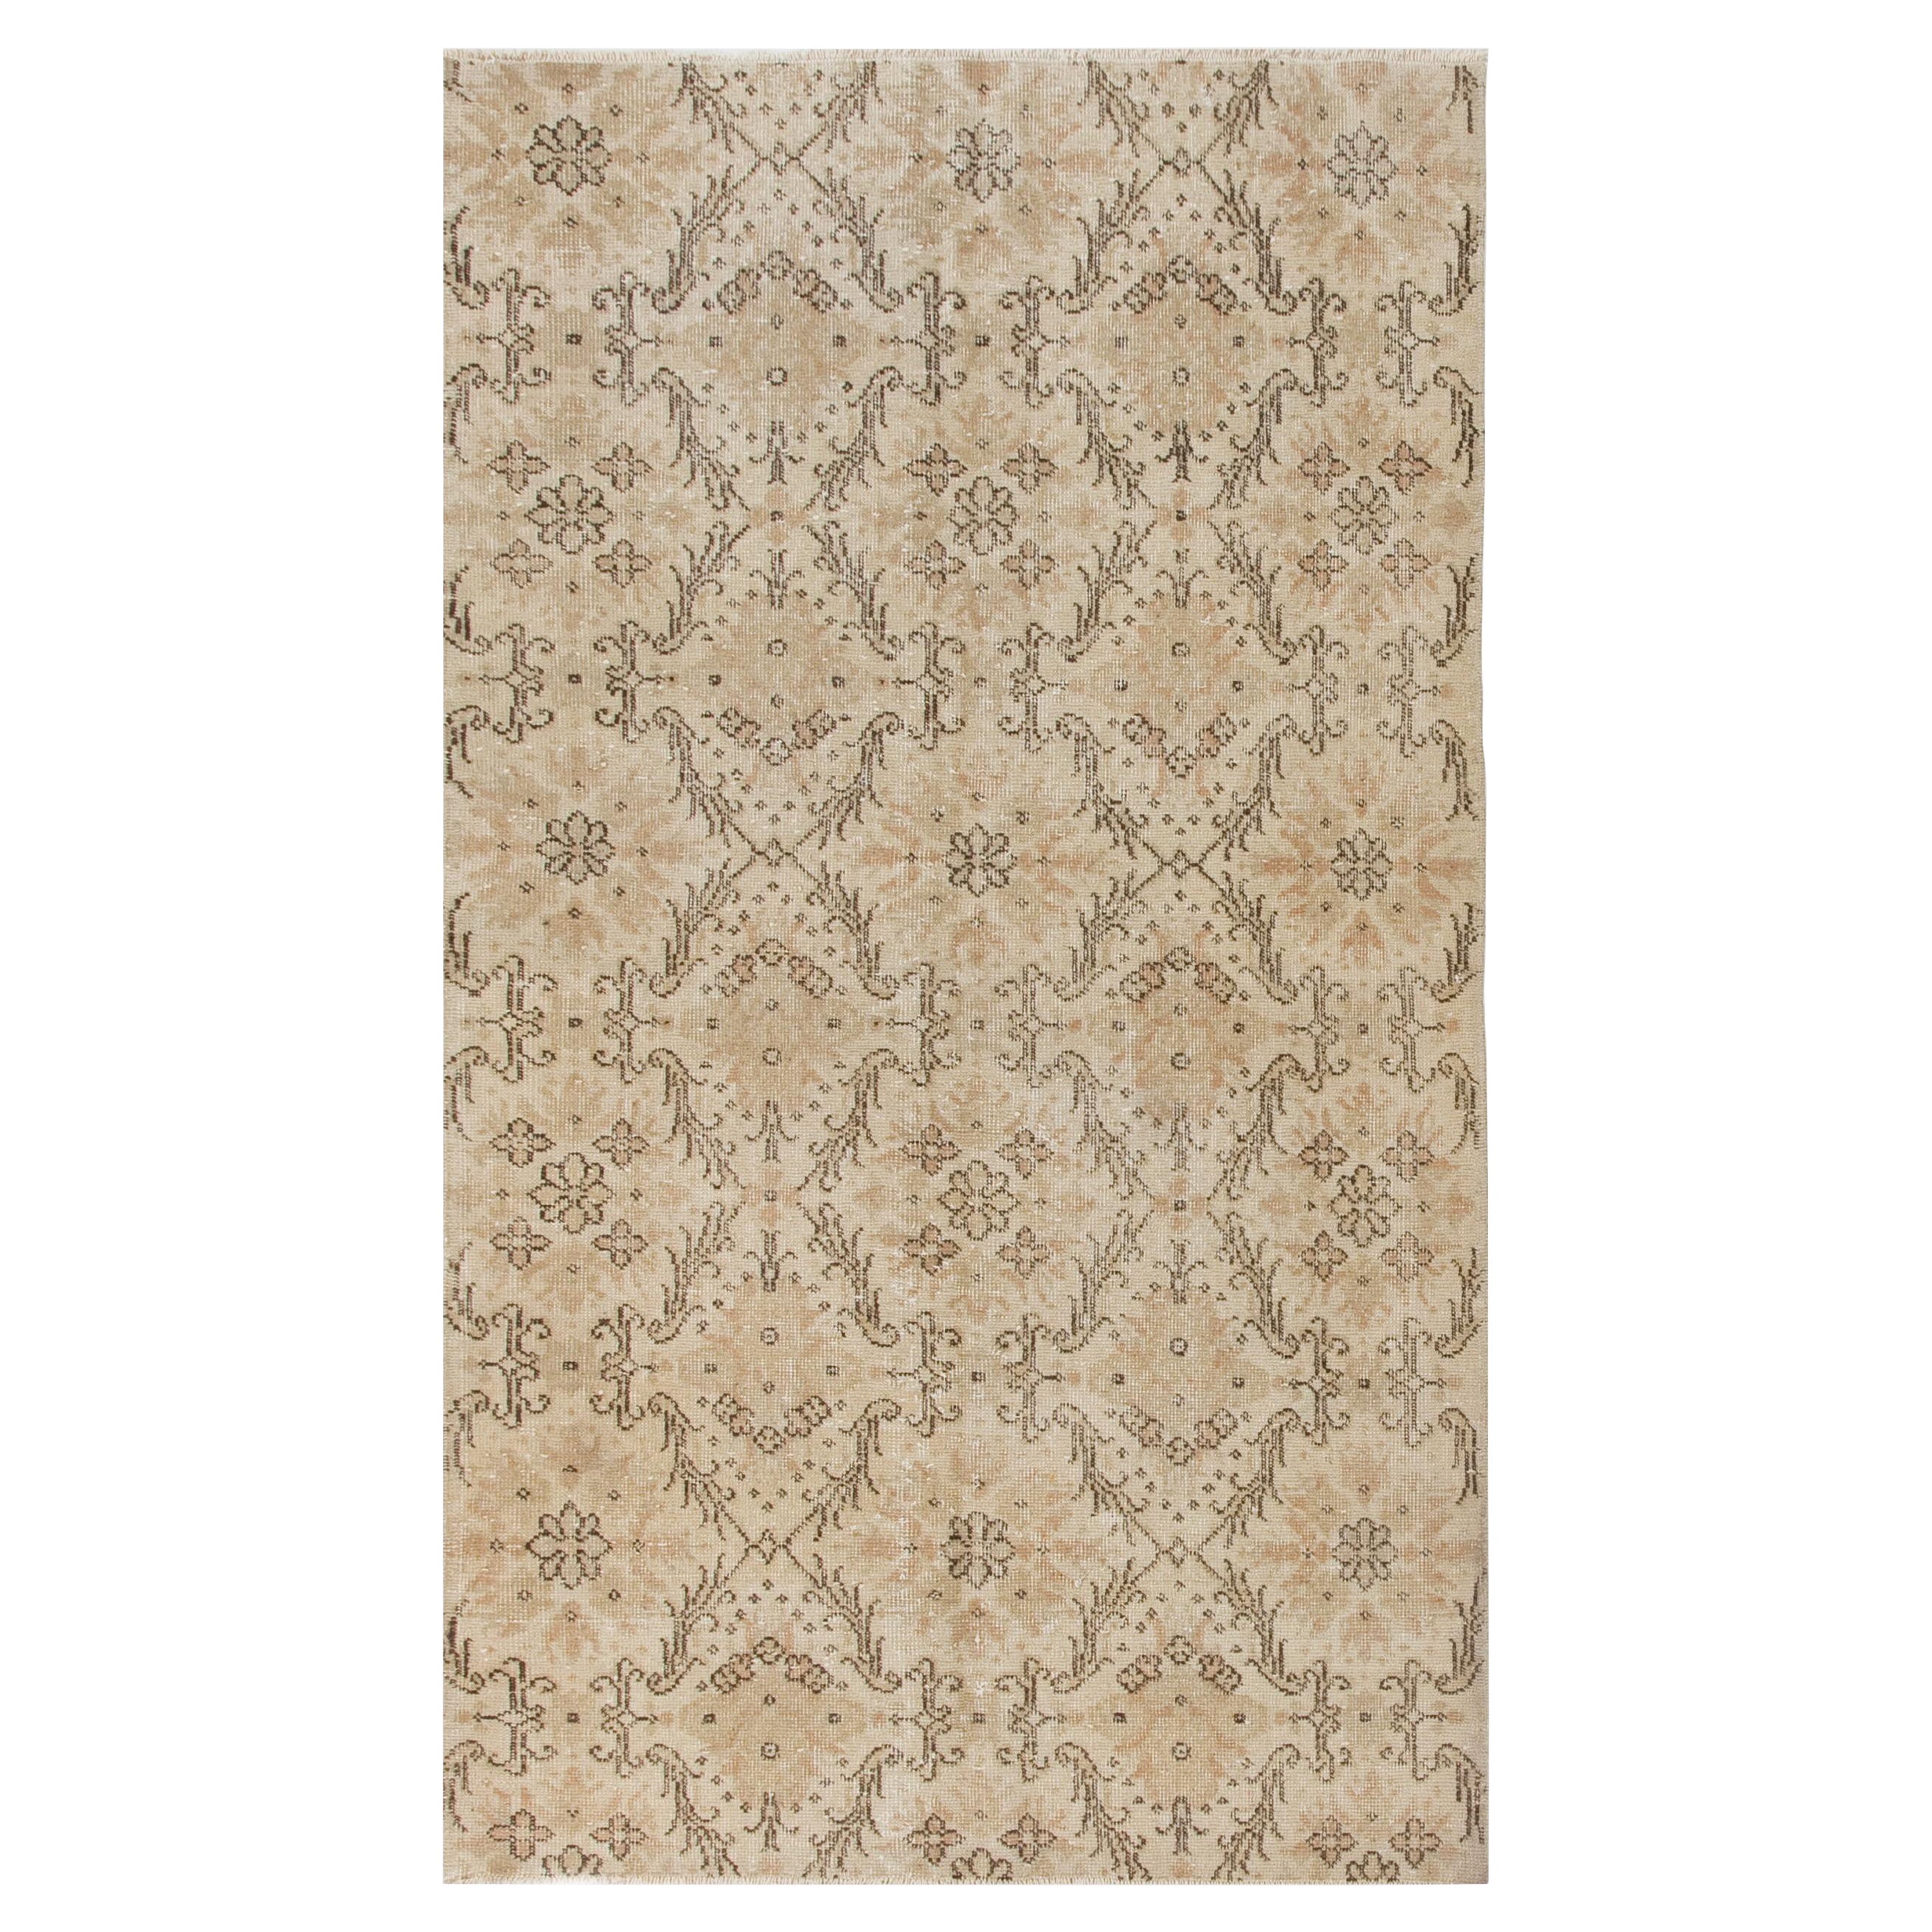 Mid-Century Hand-Knotted Turkish Rug with Floral Design, Soft Colors